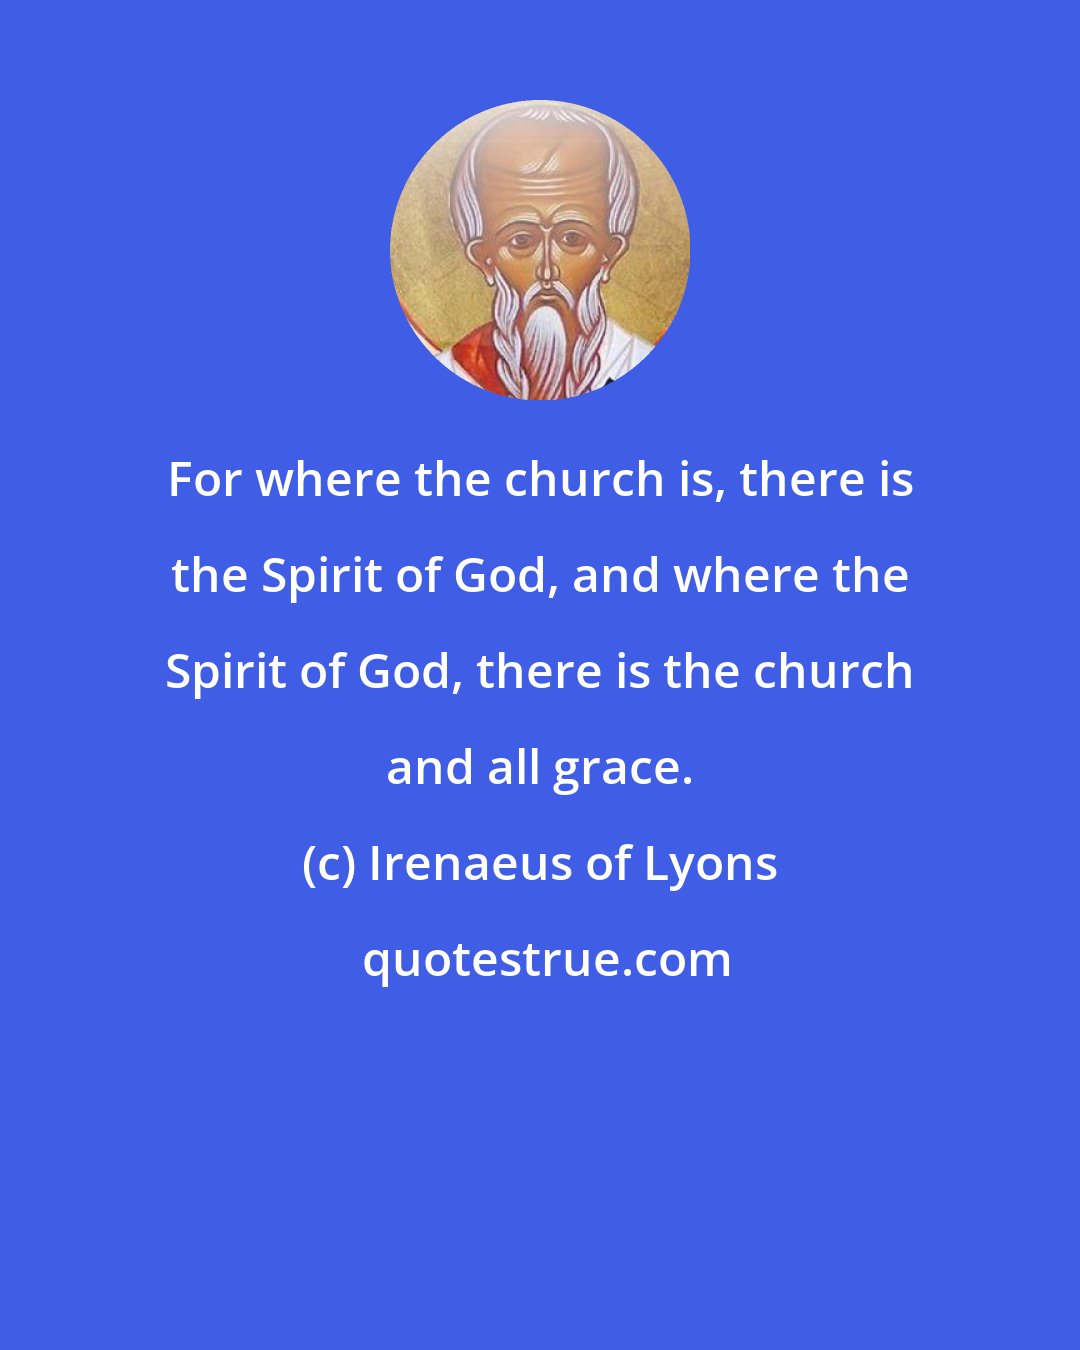 Irenaeus of Lyons: For where the church is, there is the Spirit of God, and where the Spirit of God, there is the church and all grace.